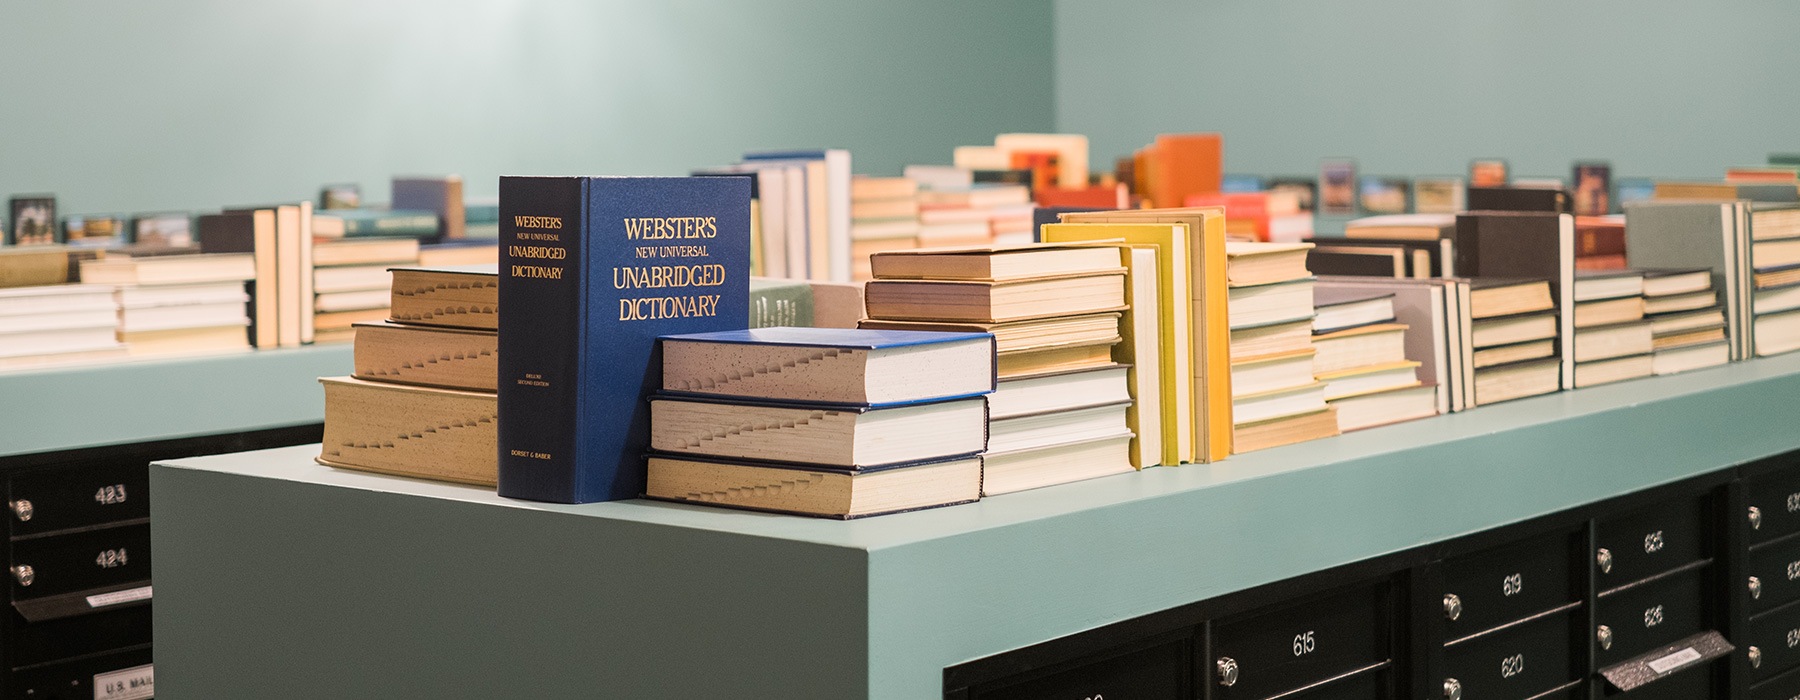 image of books on top of large mail room storage areas